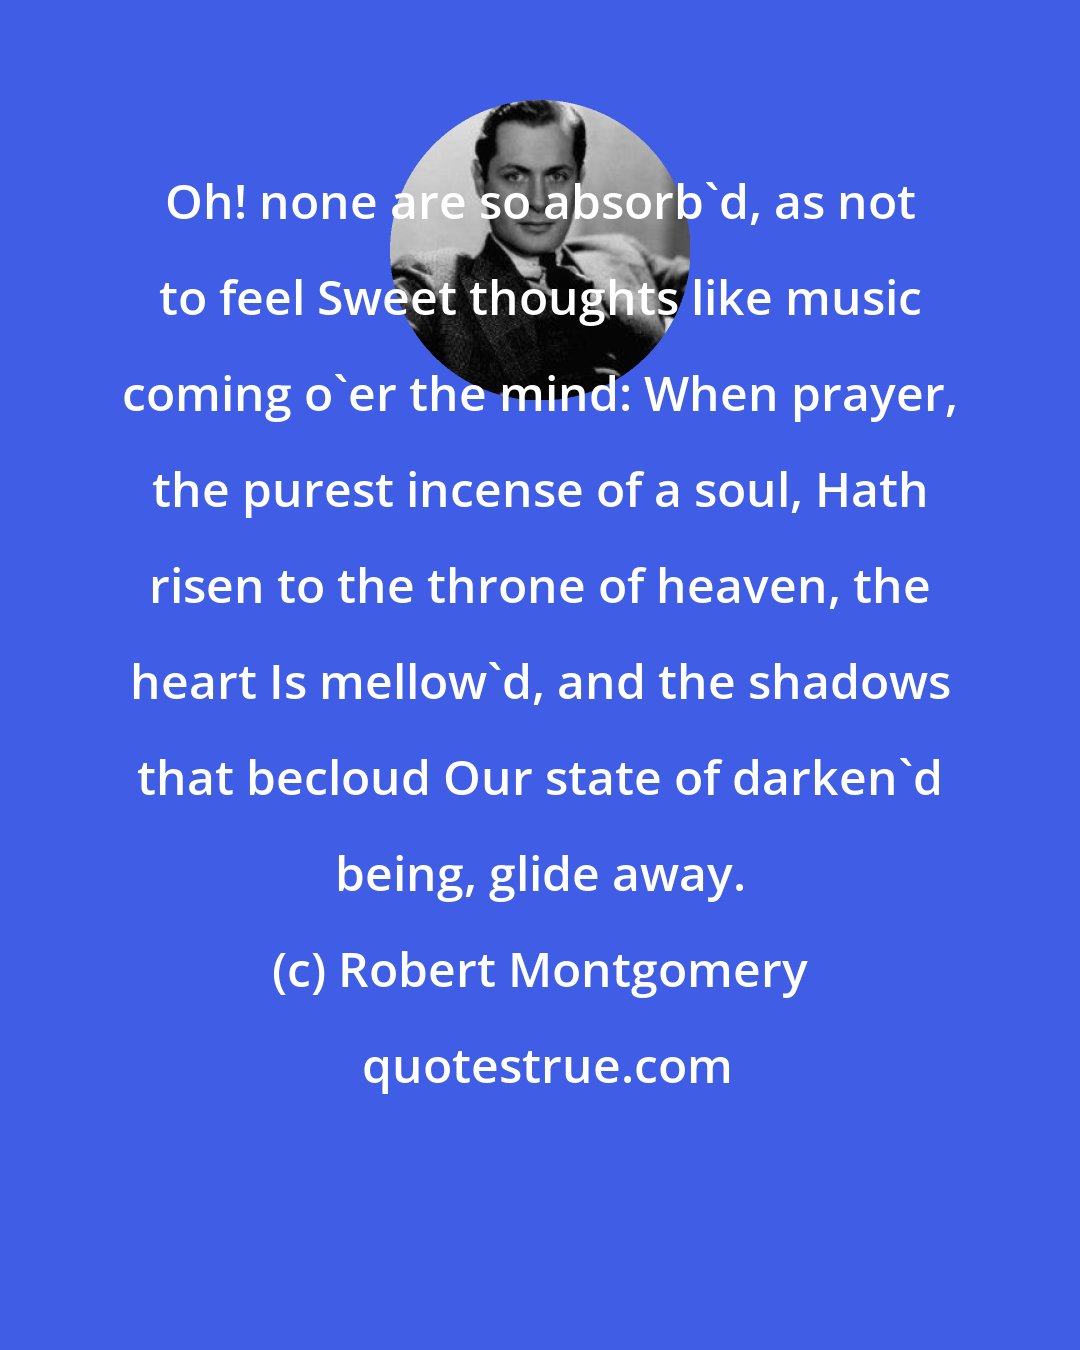 Robert Montgomery: Oh! none are so absorb'd, as not to feel Sweet thoughts like music coming o'er the mind: When prayer, the purest incense of a soul, Hath risen to the throne of heaven, the heart Is mellow'd, and the shadows that becloud Our state of darken'd being, glide away.